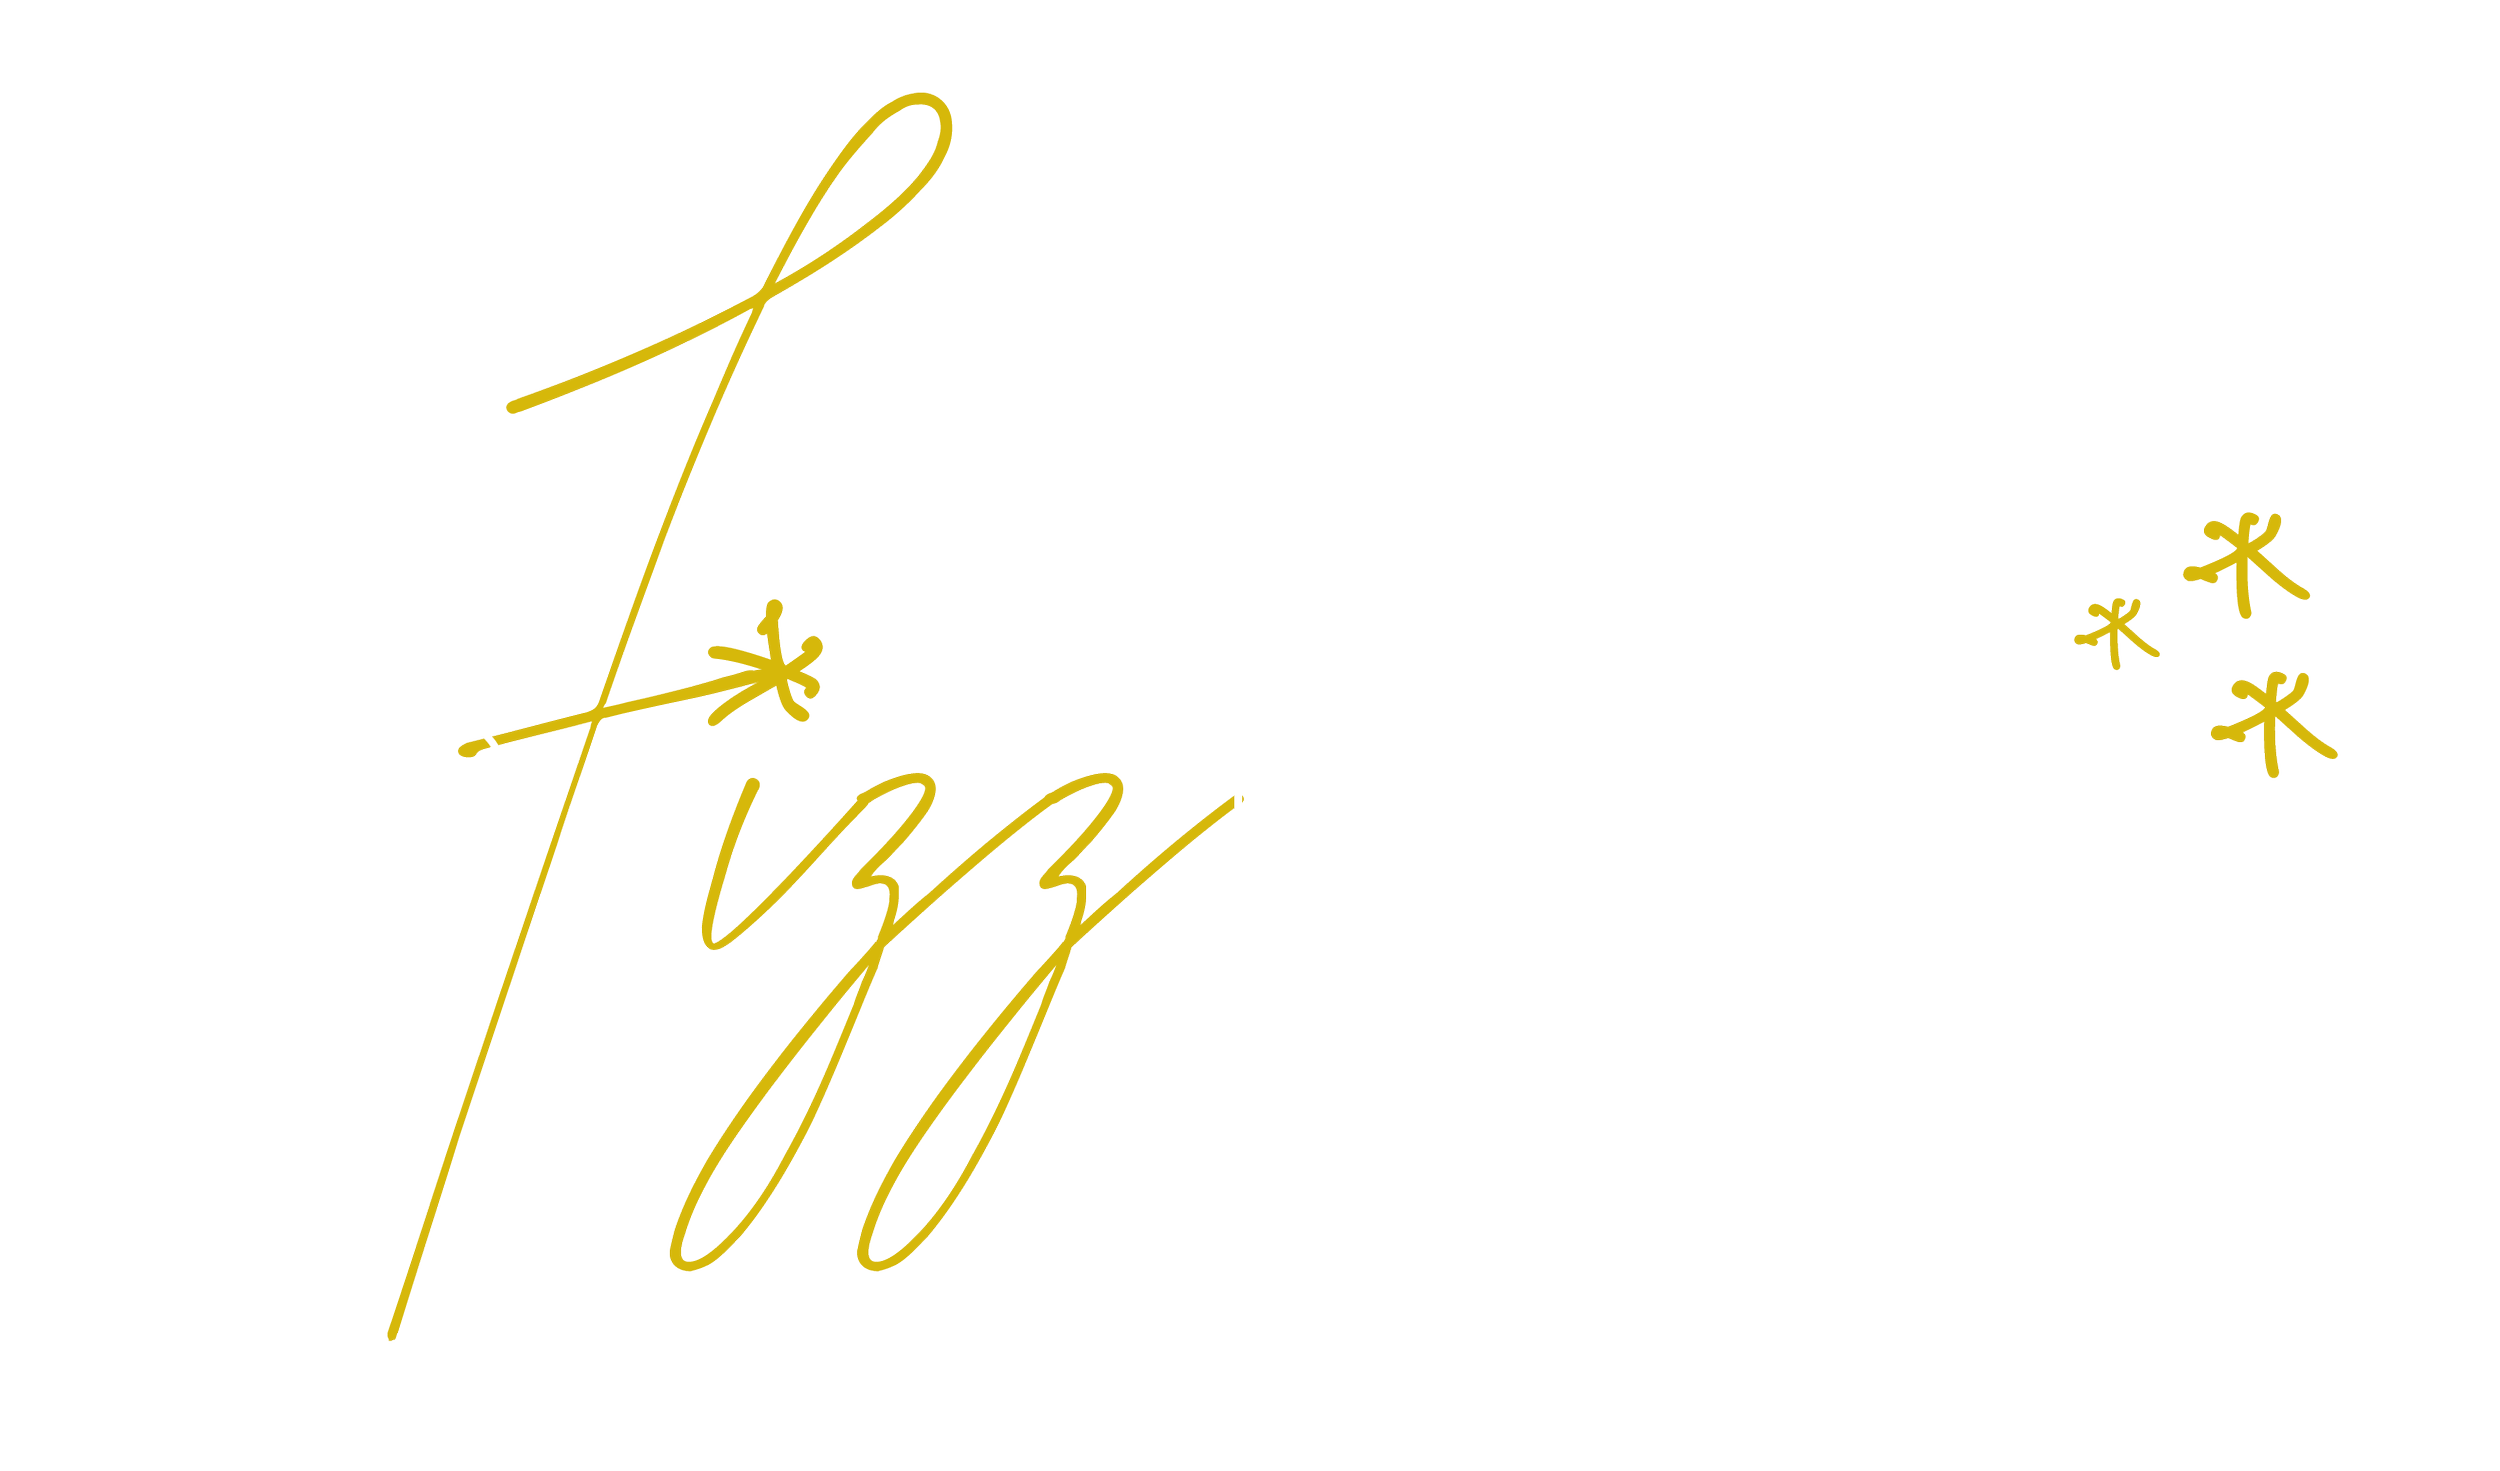 The FIZZ is Female